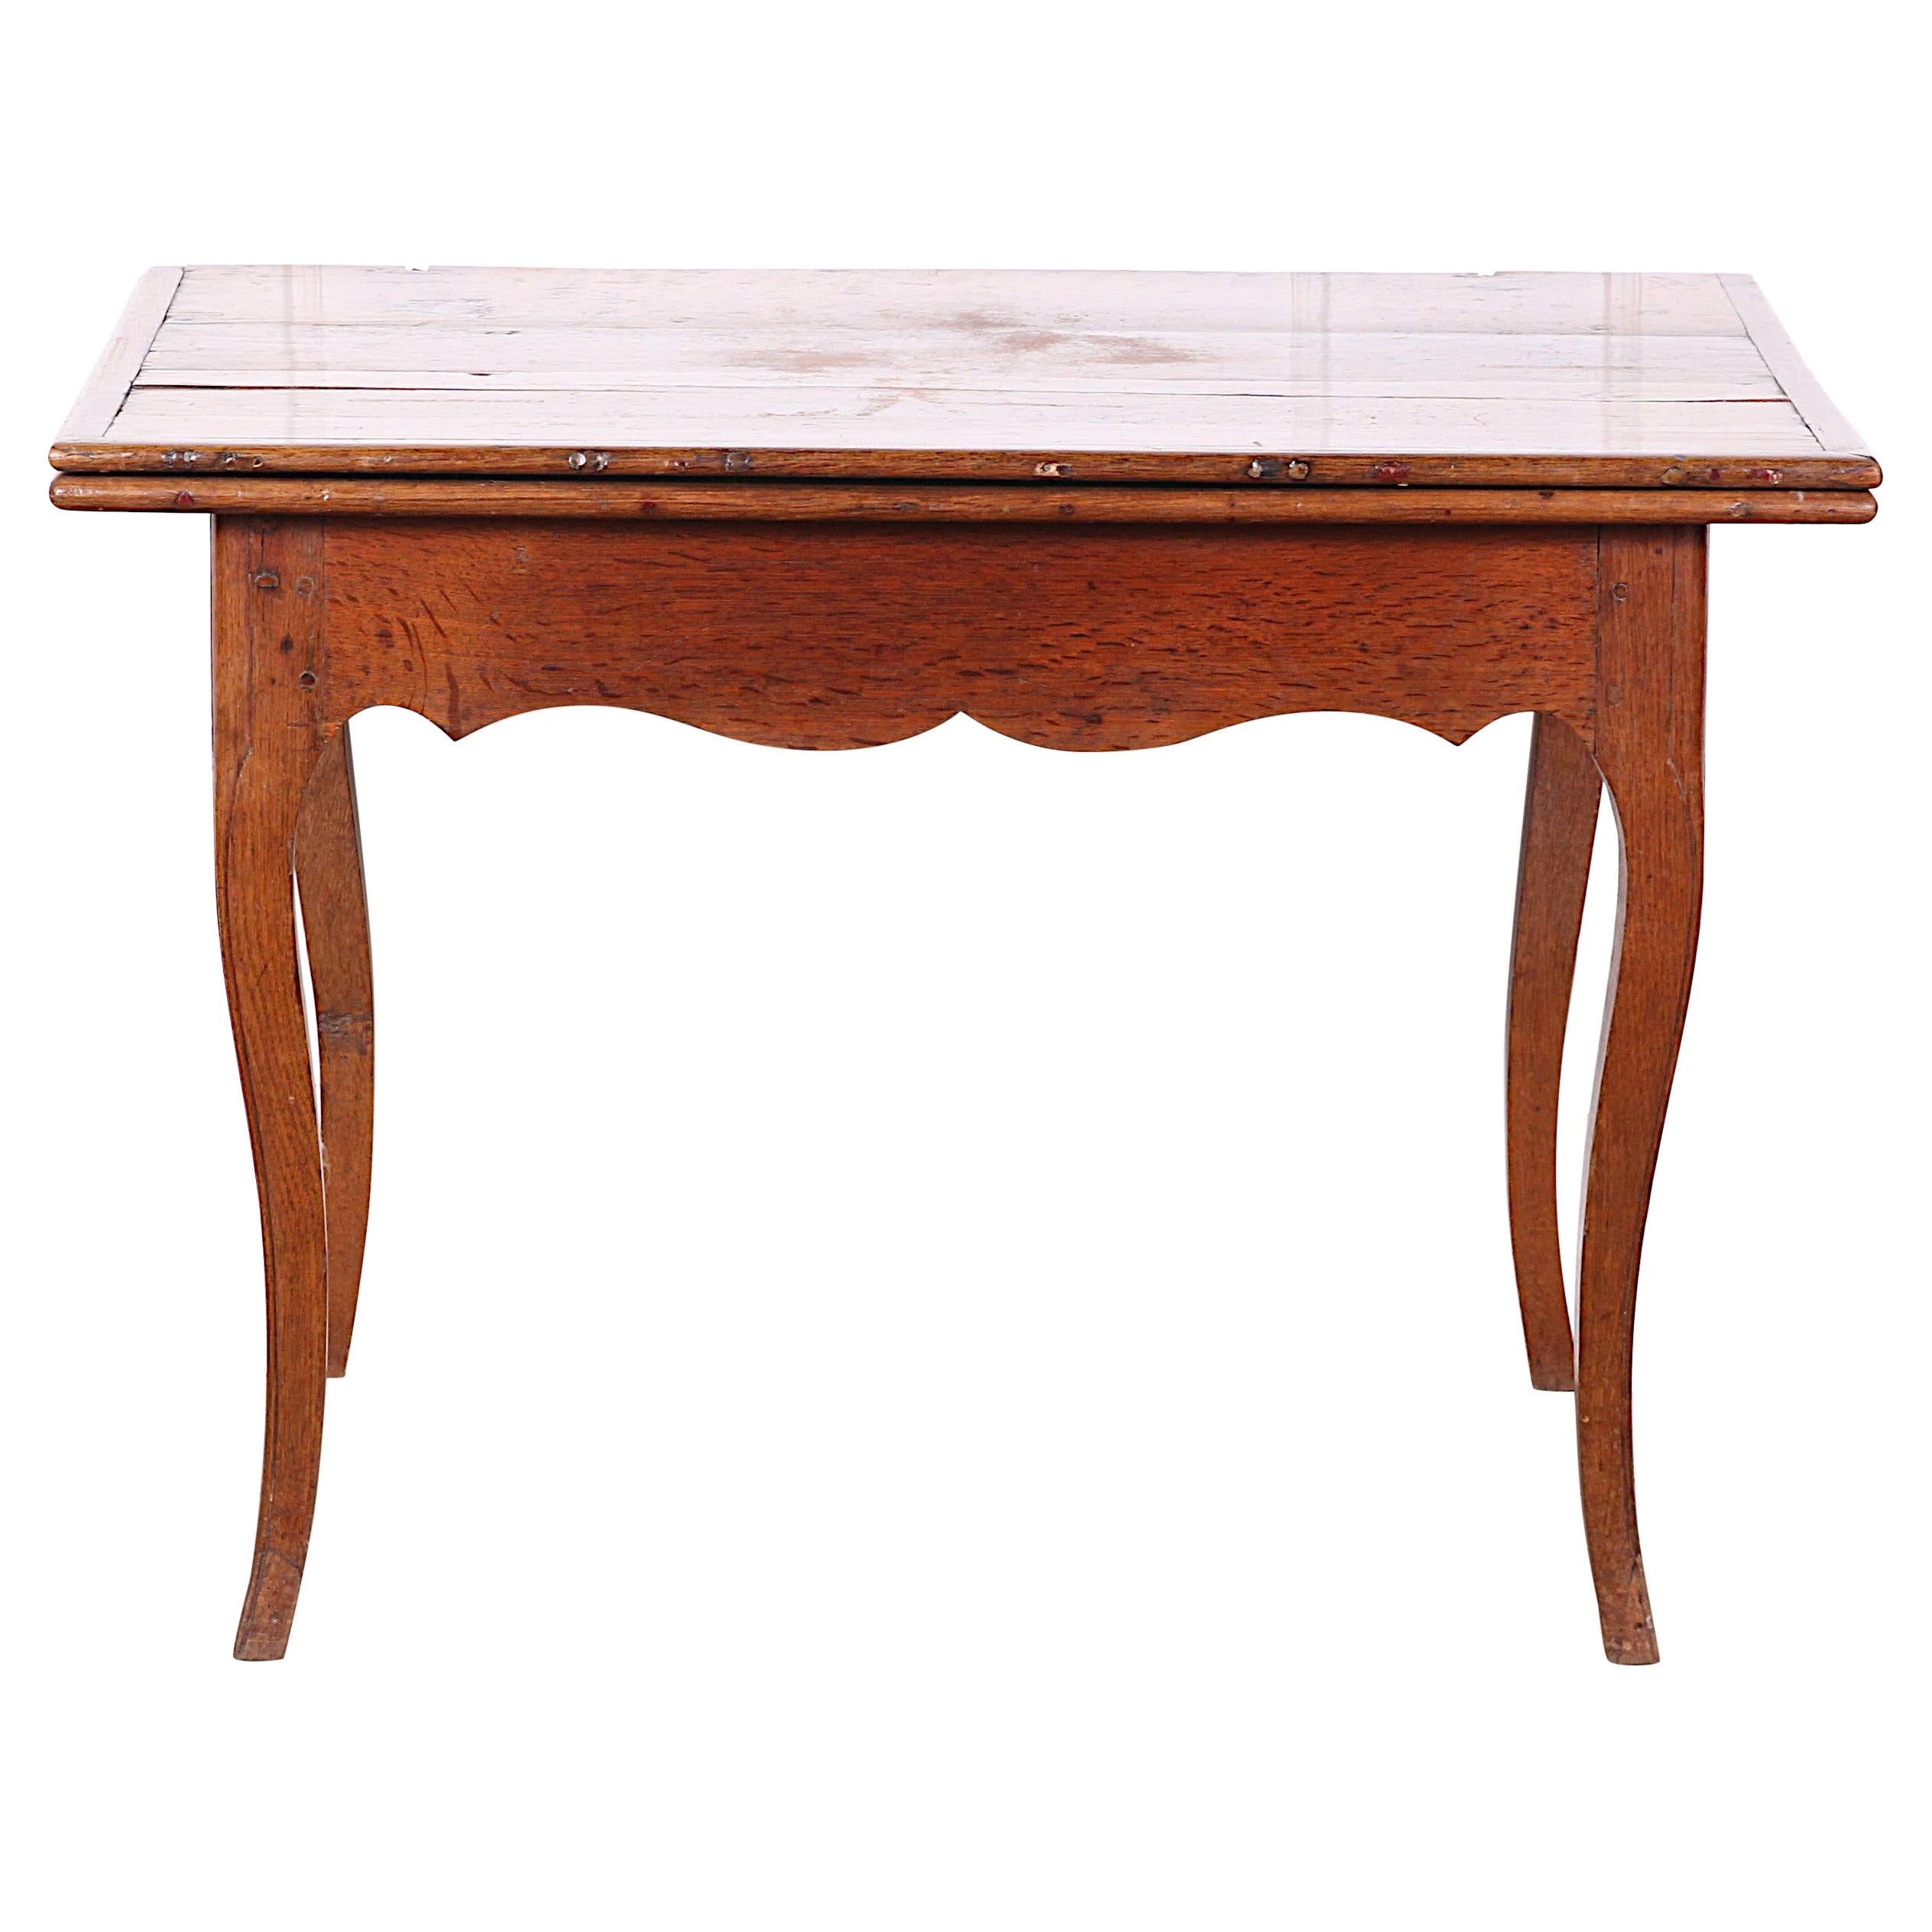 19th Century French Extending Farm Table